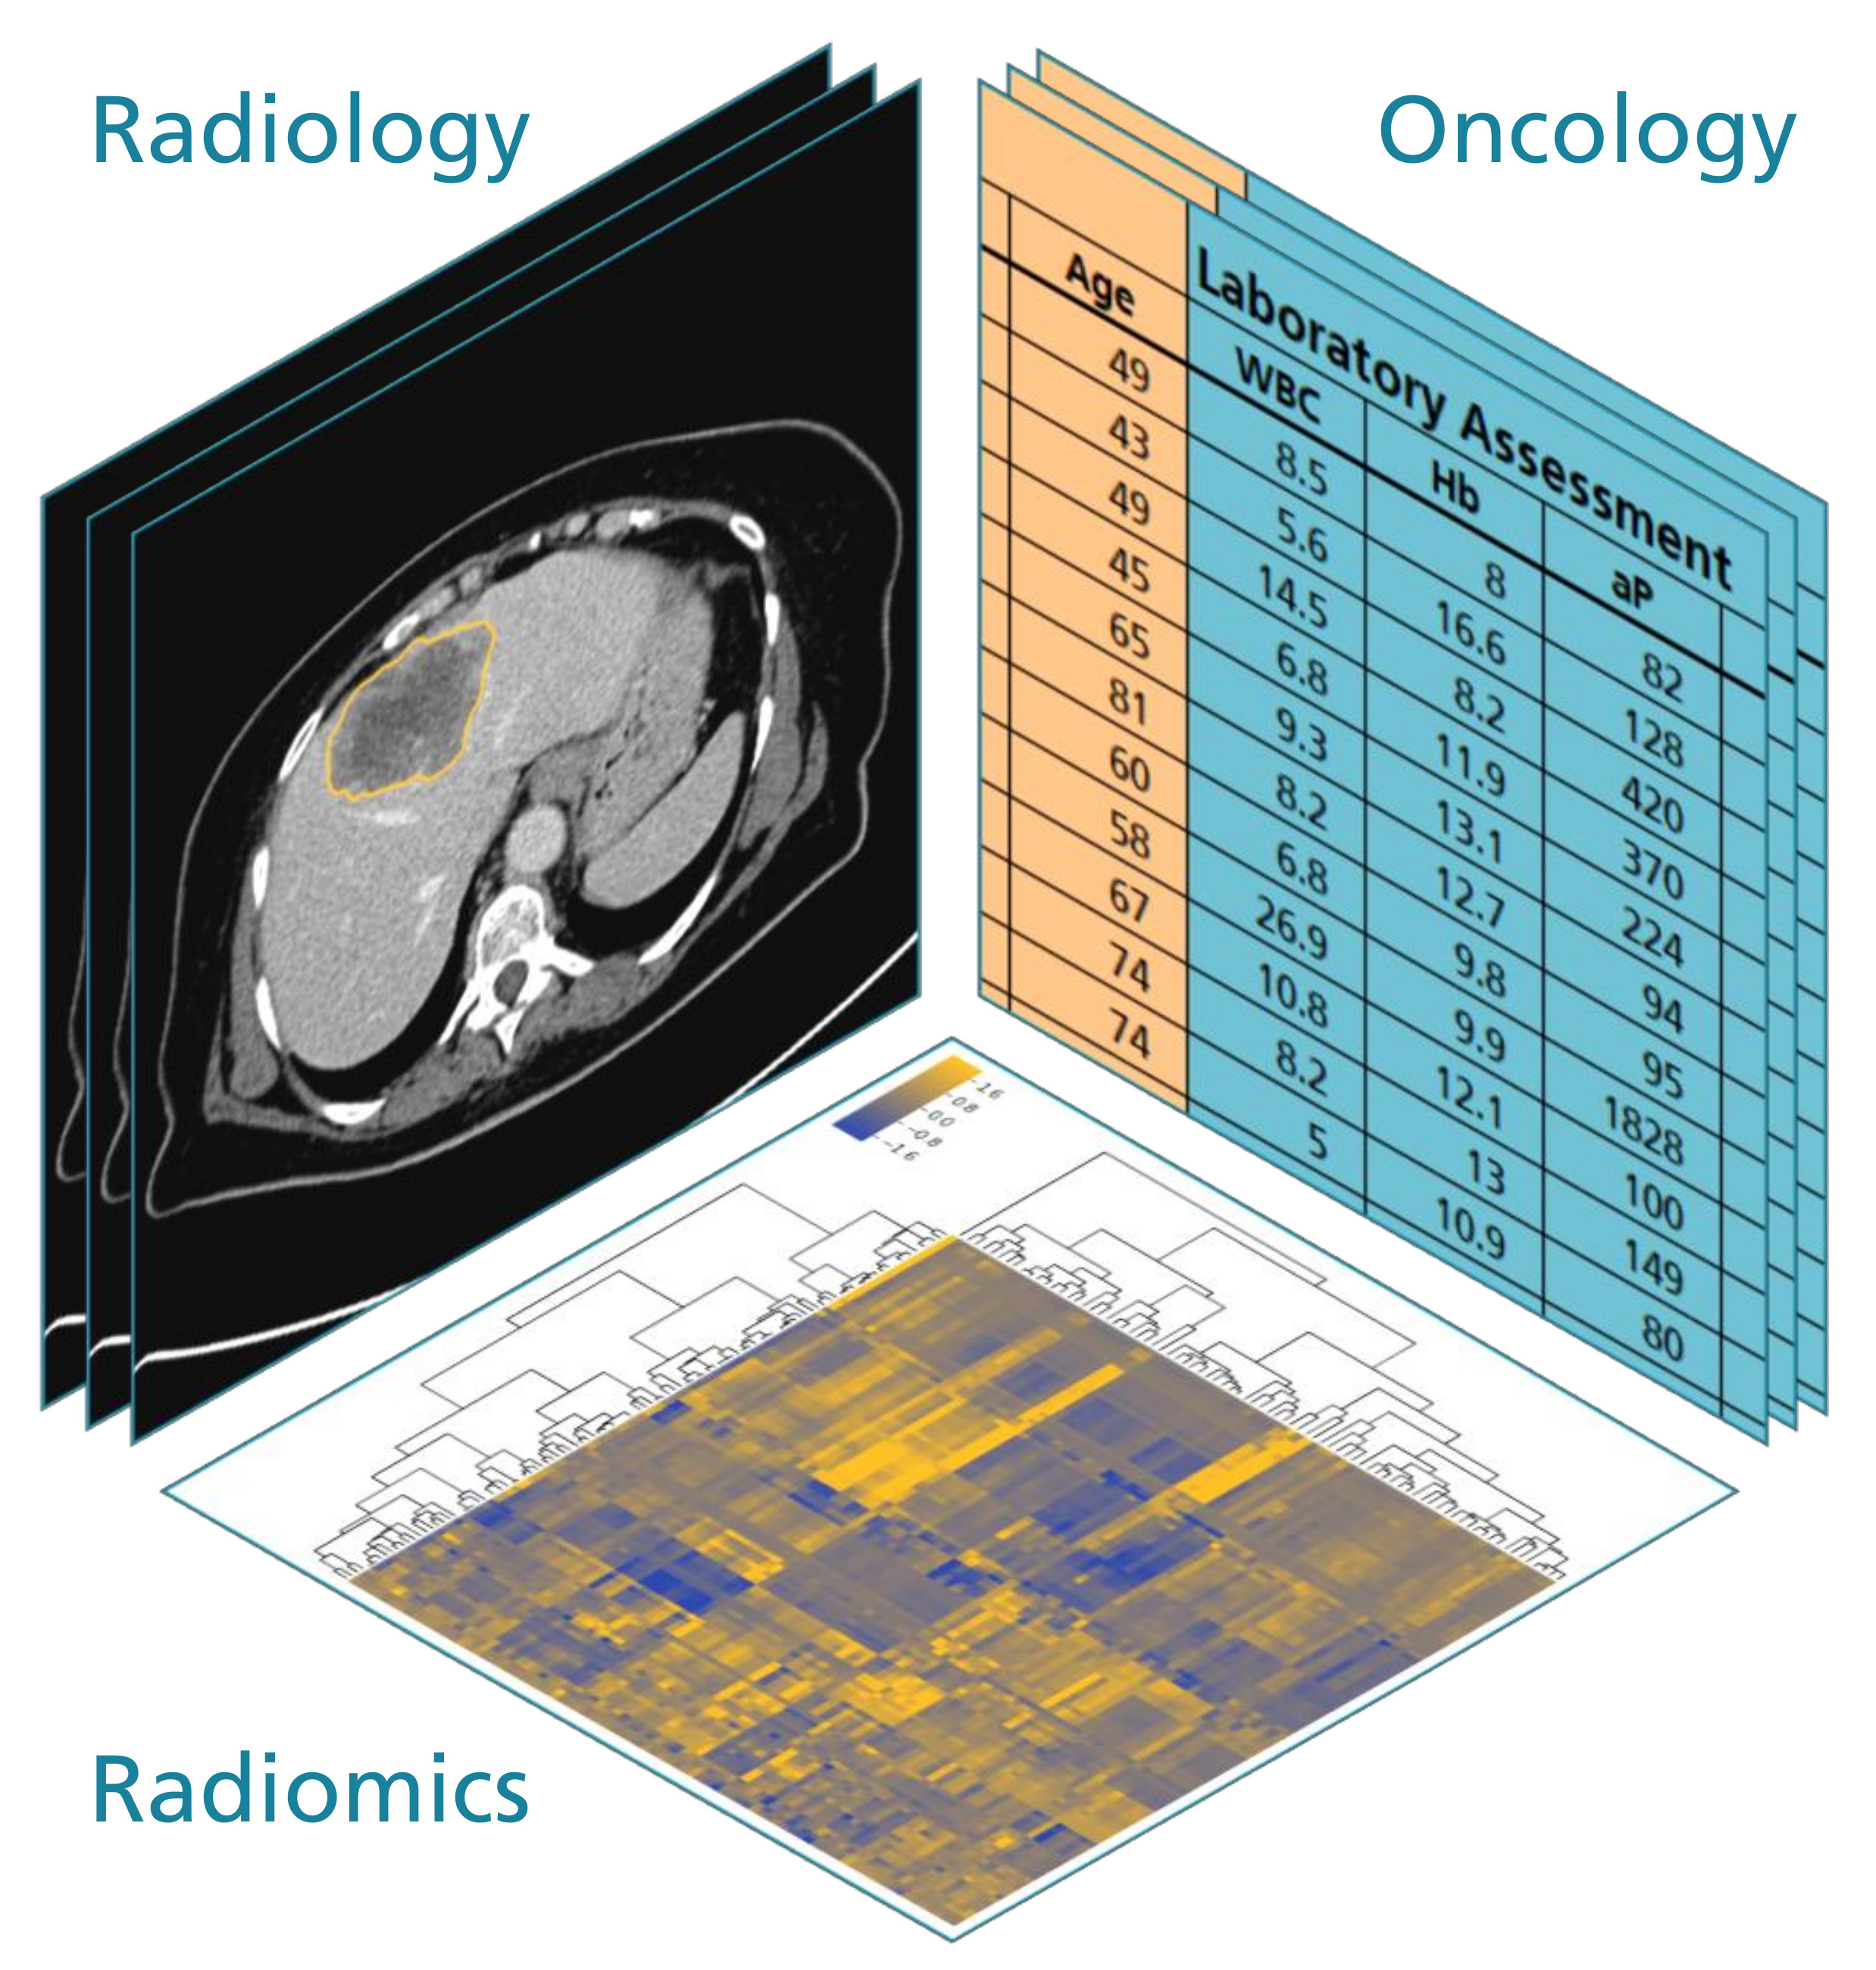 CT image, table with clinical parameters and heatmap showing their correlation.